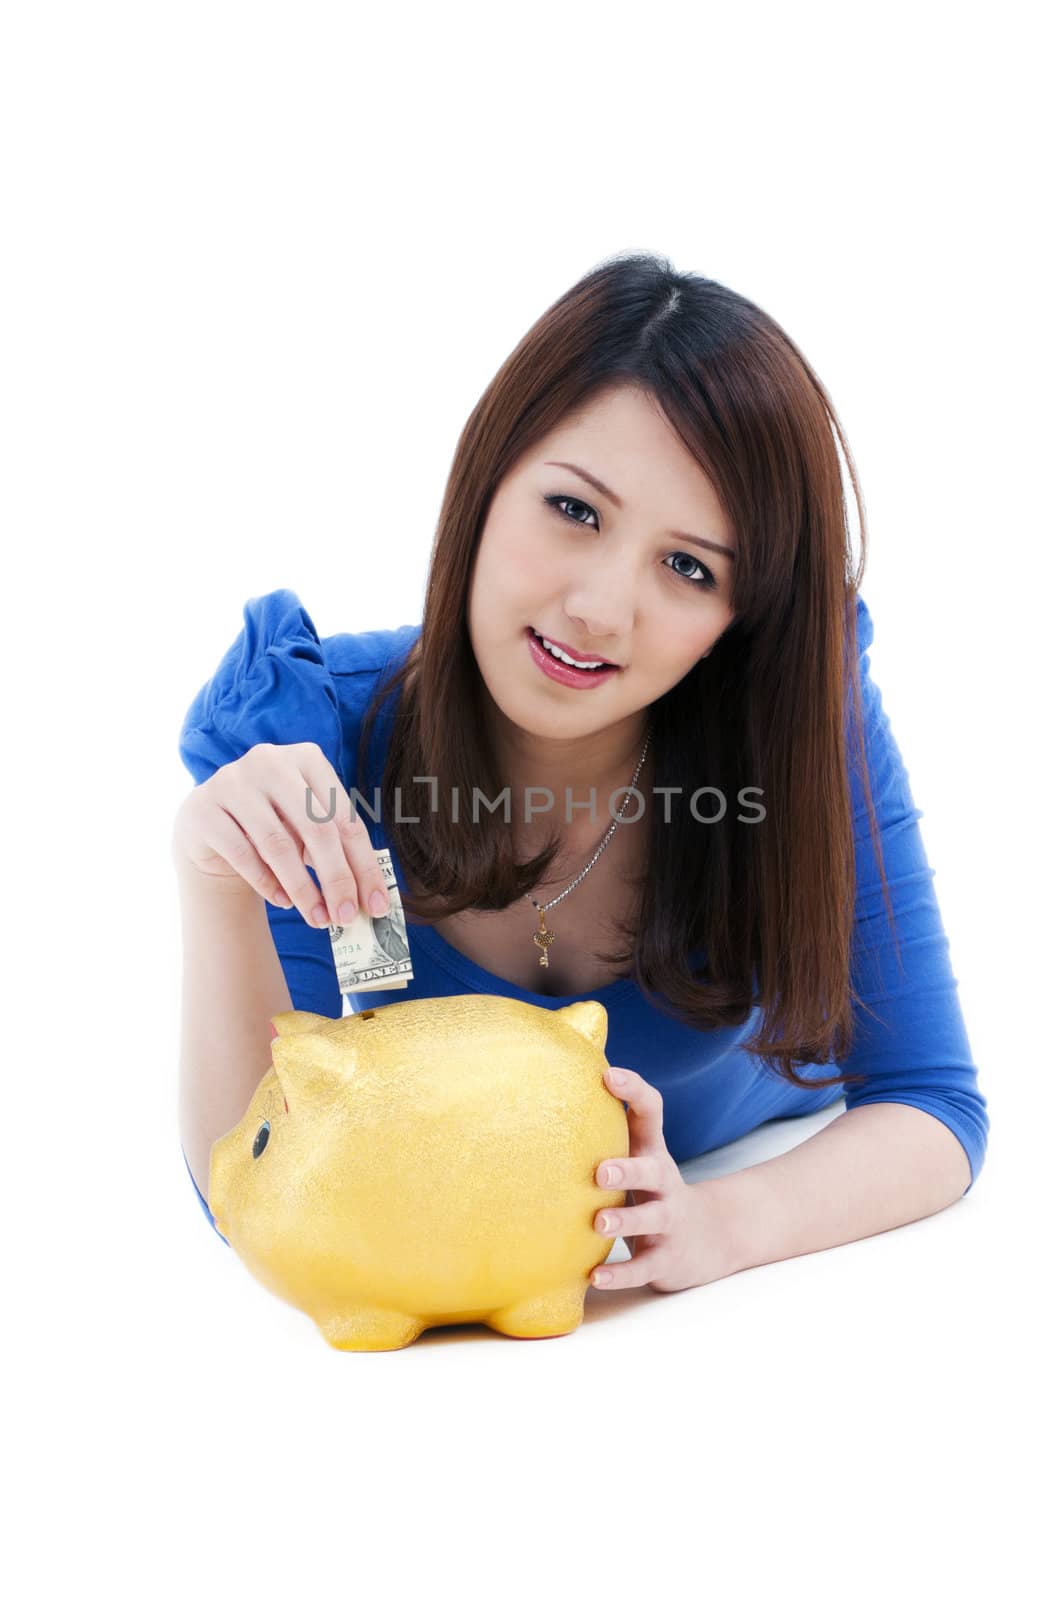 Portrait of an attractive young woman putting money into piggy bank over white background.